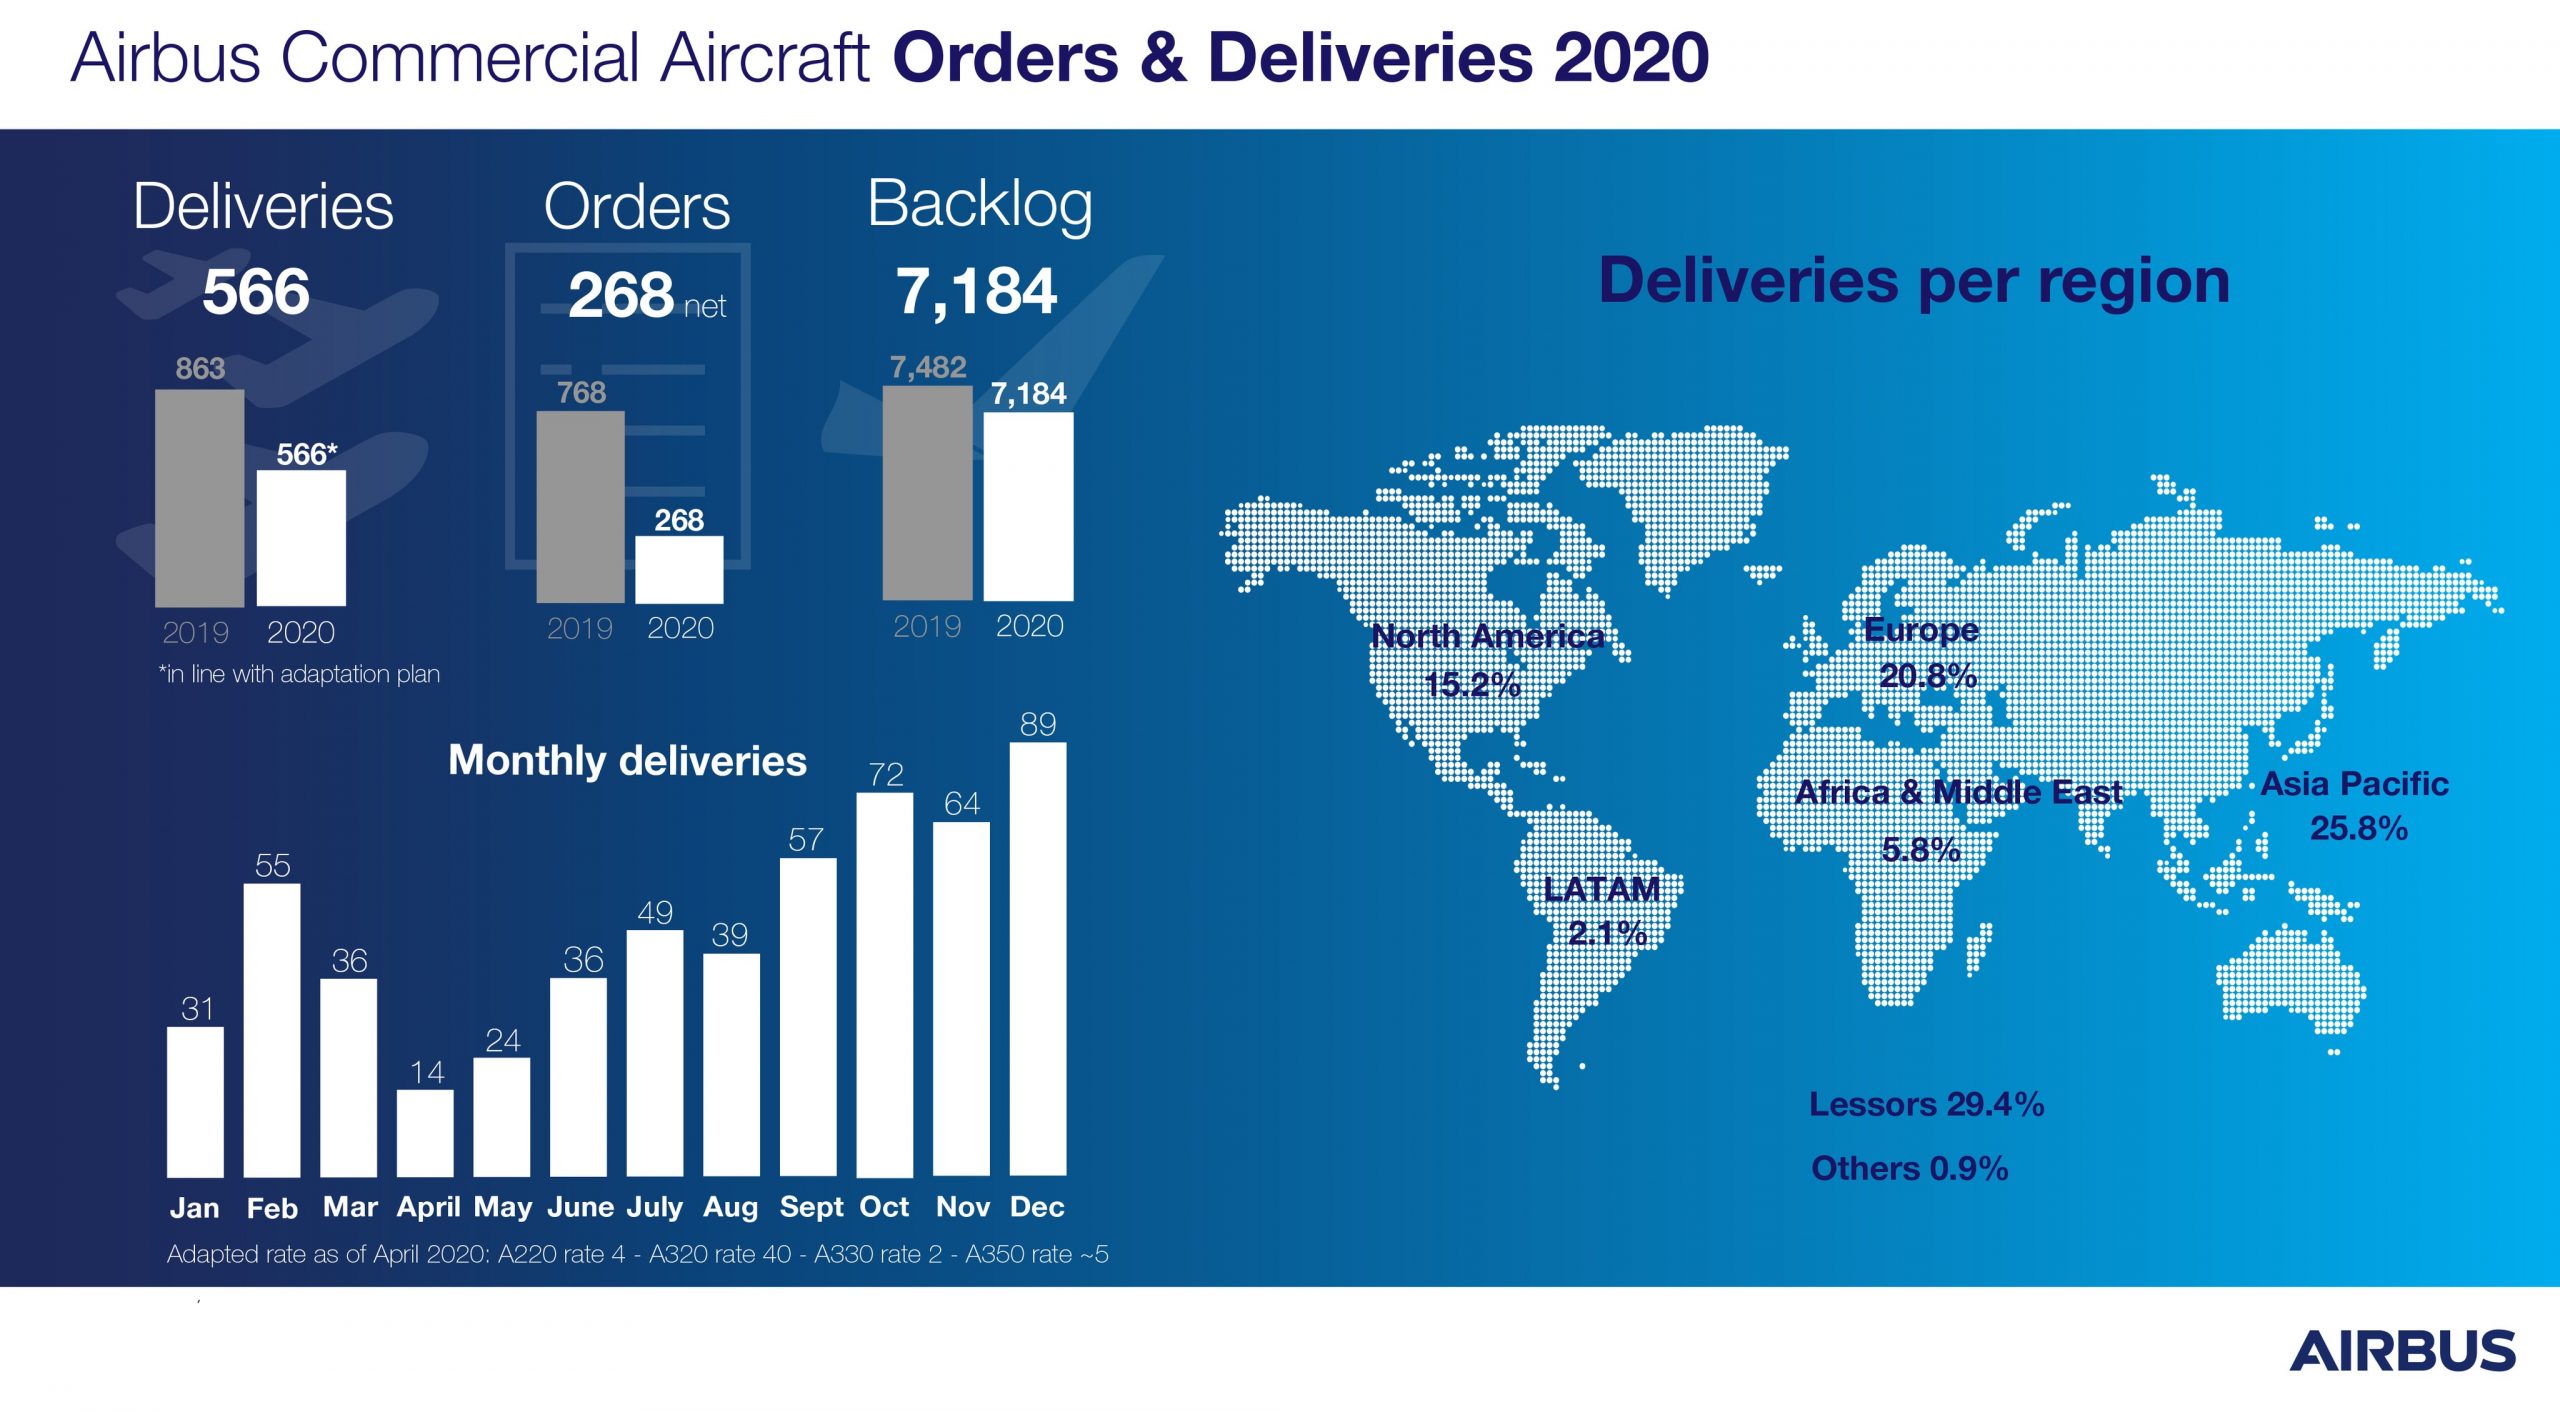 Airbus 2020 deliveries and orders